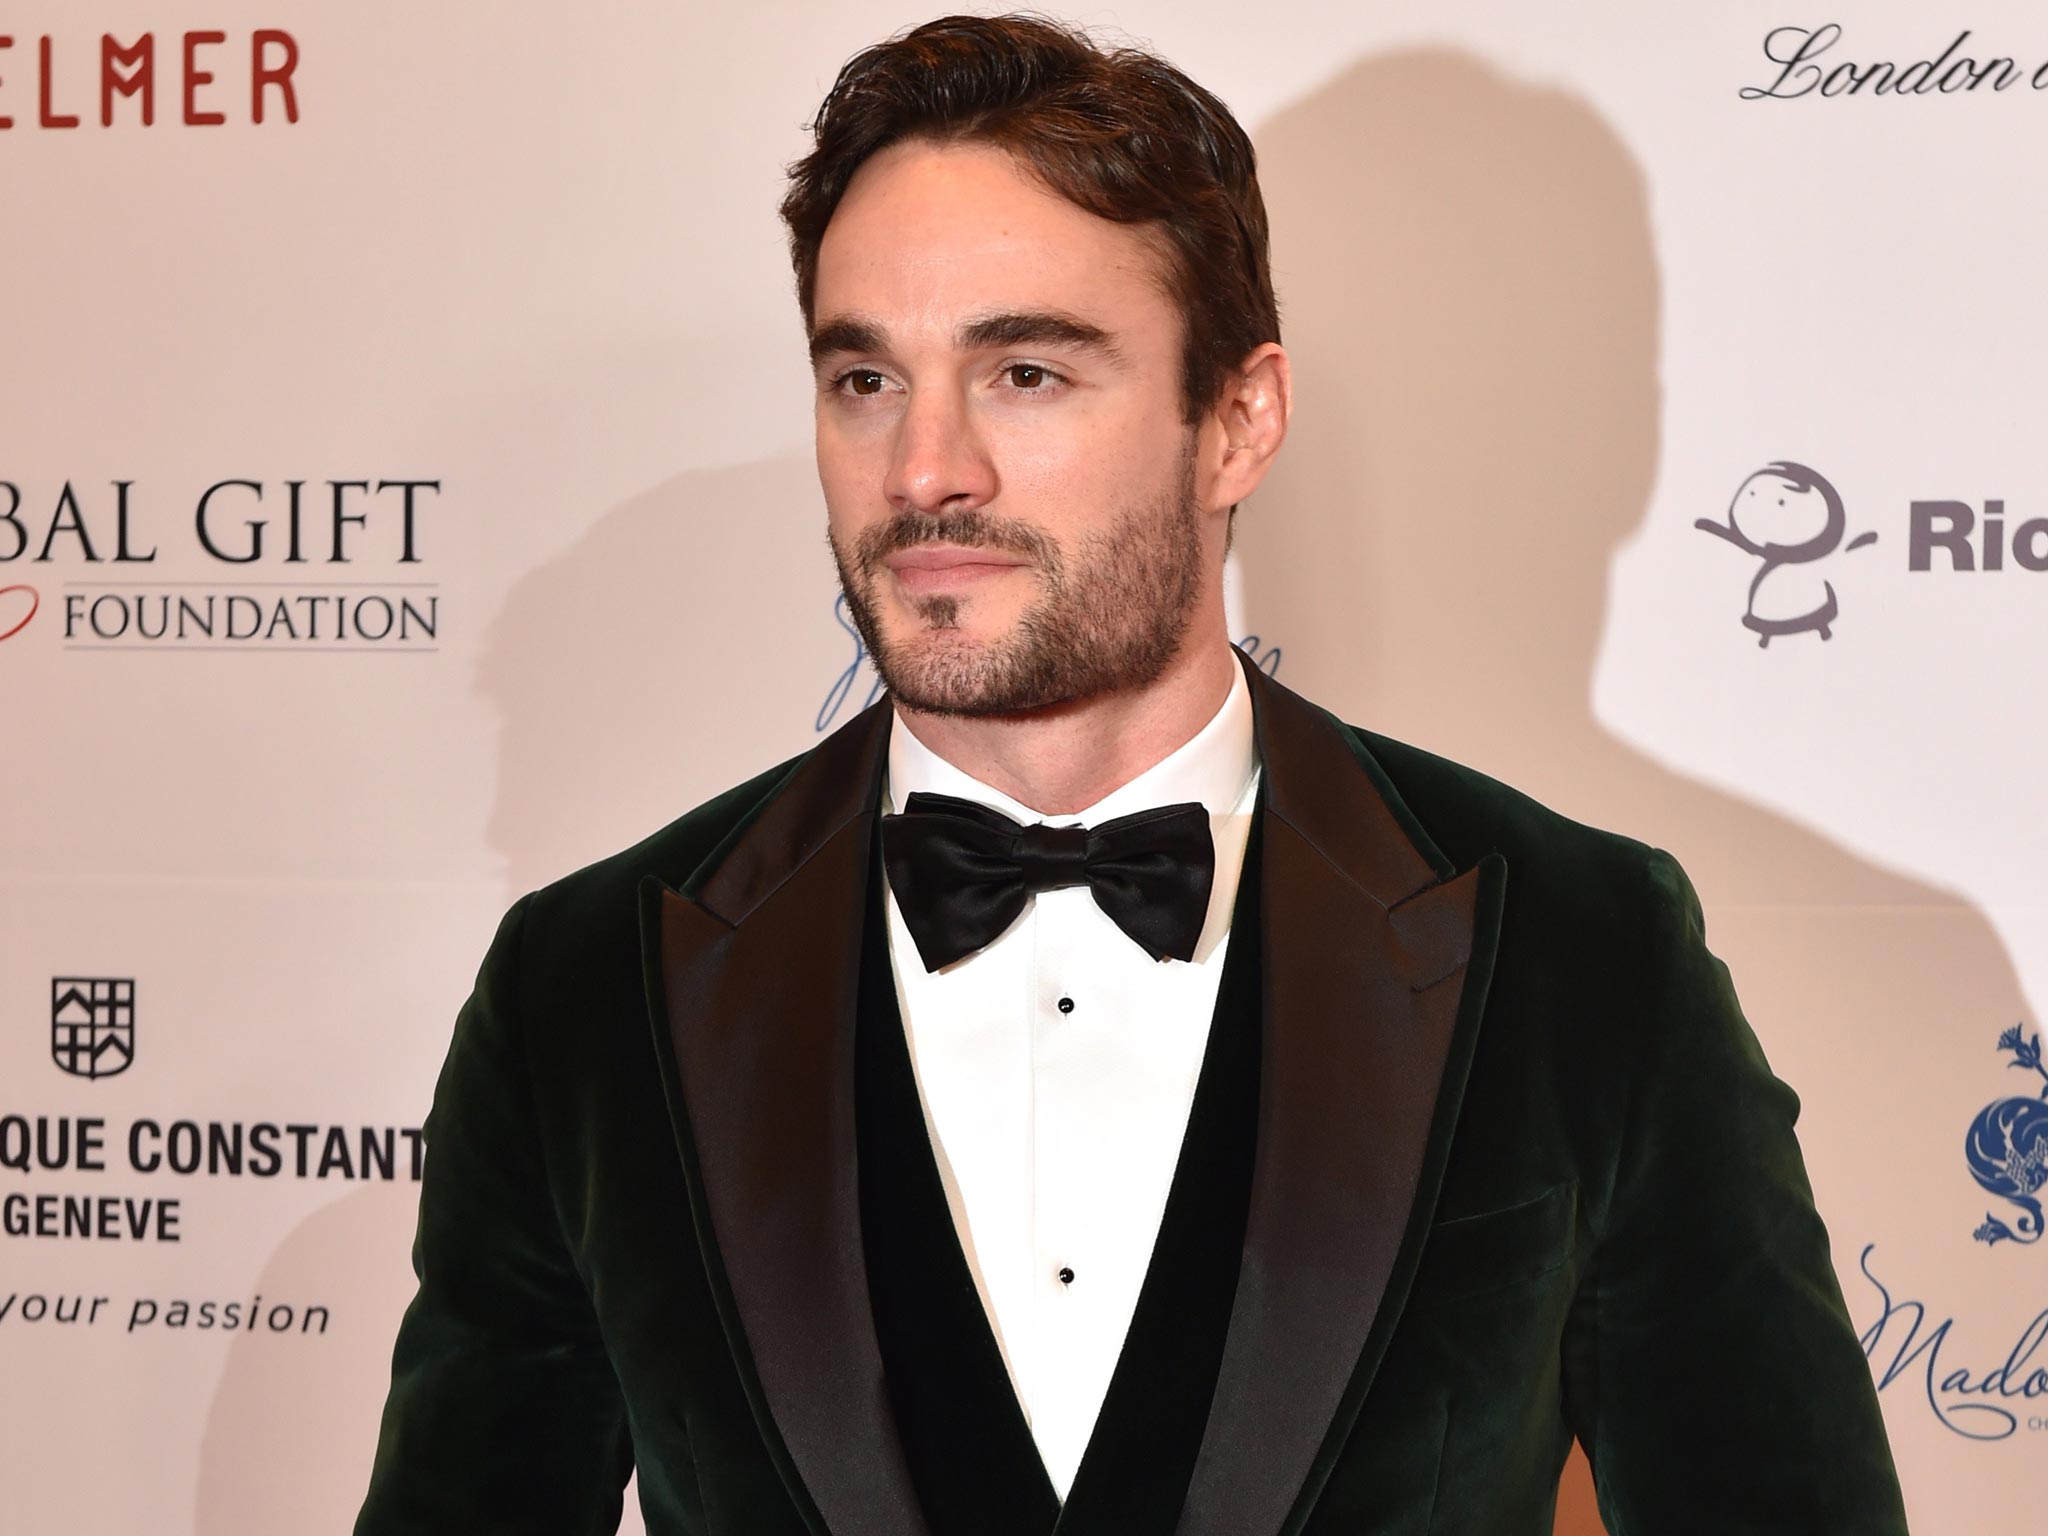 Former rugby player Thom Evans auditioned for the role of Christian Grey